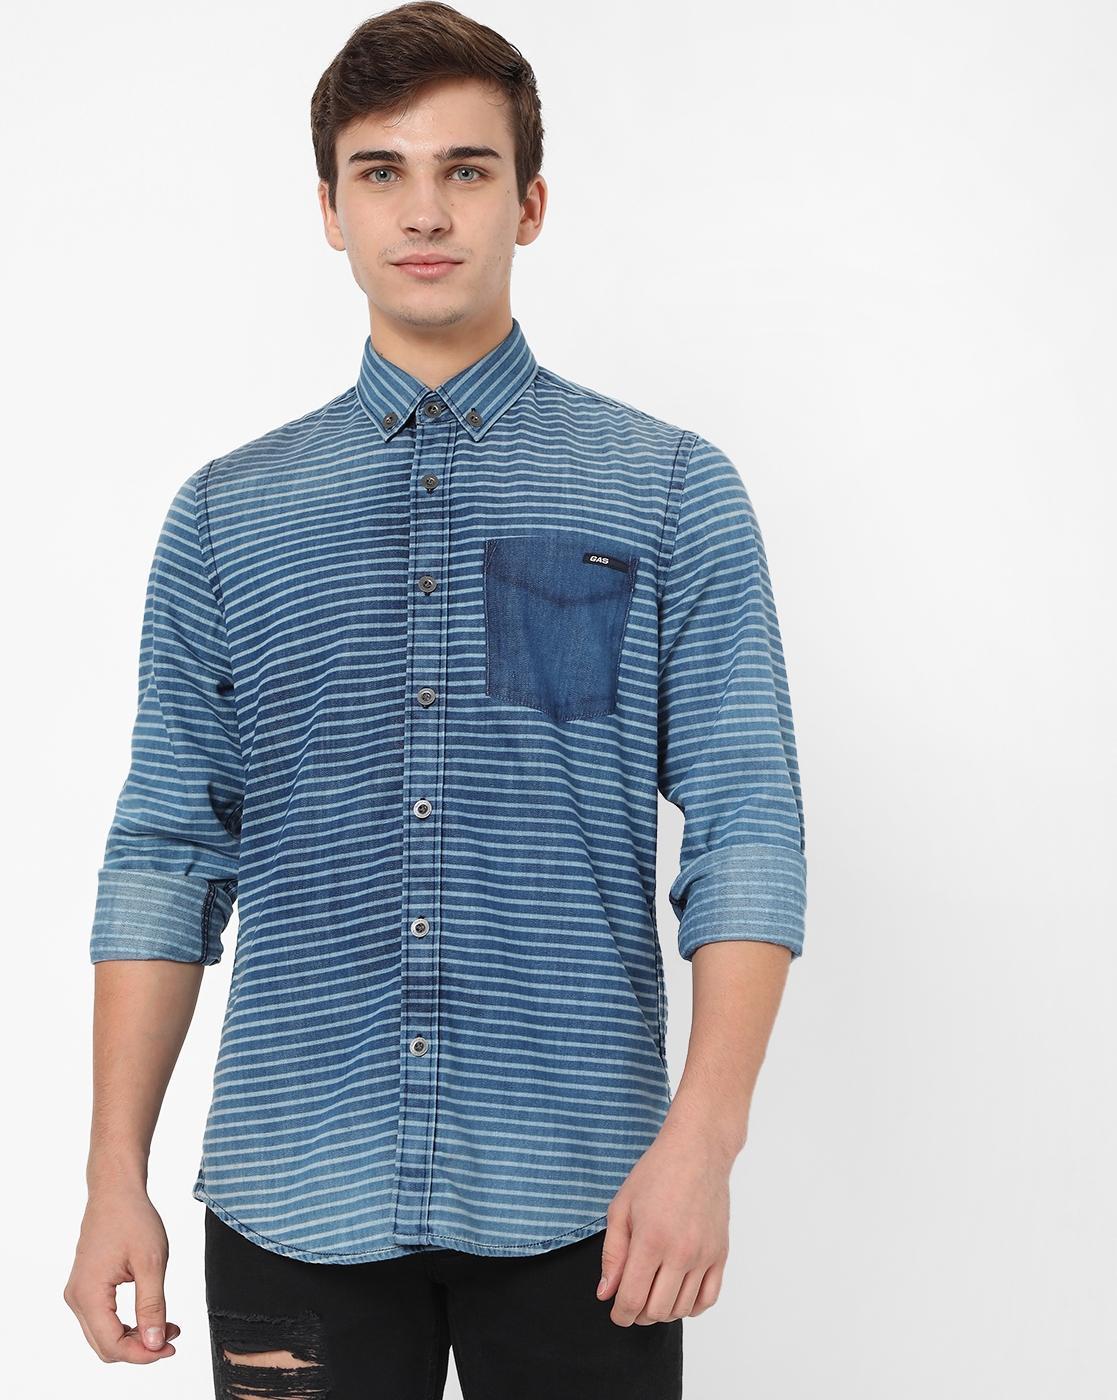 Flix Striped Slim Fit Shirt with Button-Down Collar